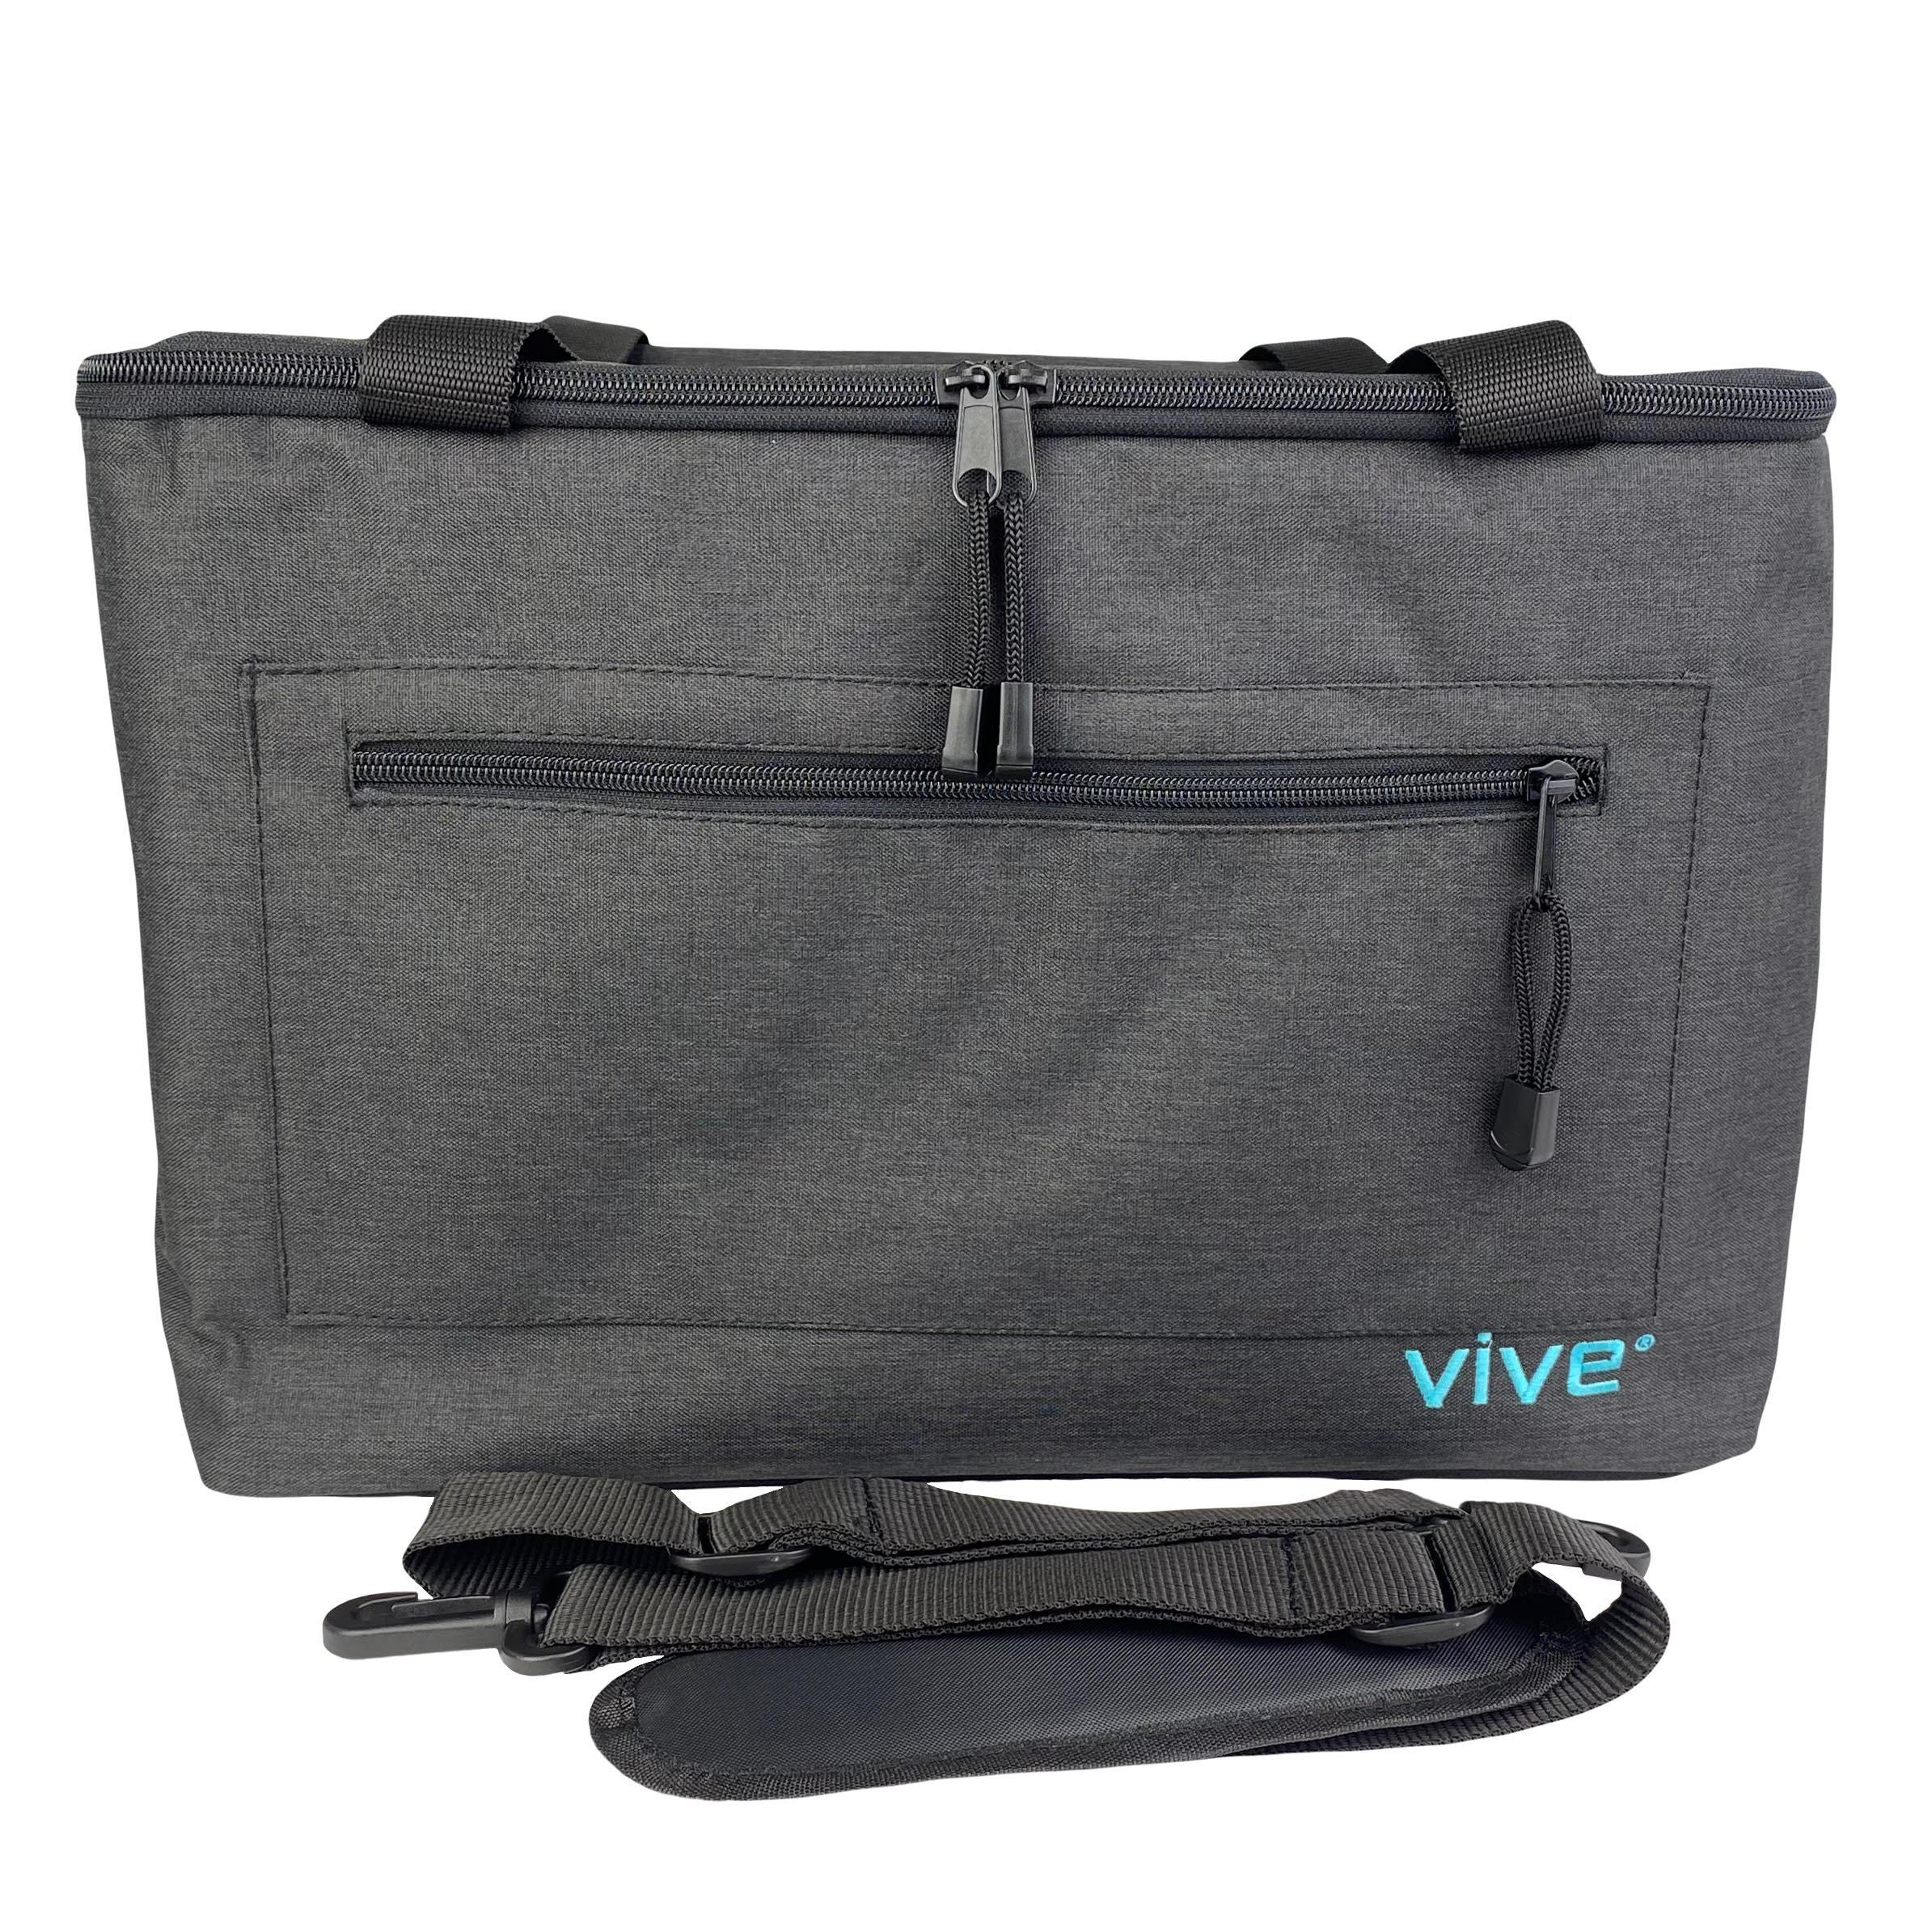 Cold Therapy Multi-Use Carry Bag - LVA2094GRY-2 Cold Therapy Multi-Use Carry Bag - undefined by Supply Physical Therapy Accessories, Aircast Accessories, Breg, Breg Accessories, Breg Polar Care Wave, Breg Wave Accessories, Classic3 Accessories, Clear3, Clear3 Accessories, Cub Accessories, Cube, Cube Accessories, Donjoy Accessories, Glacier Accessories, Kodiak, Replacement